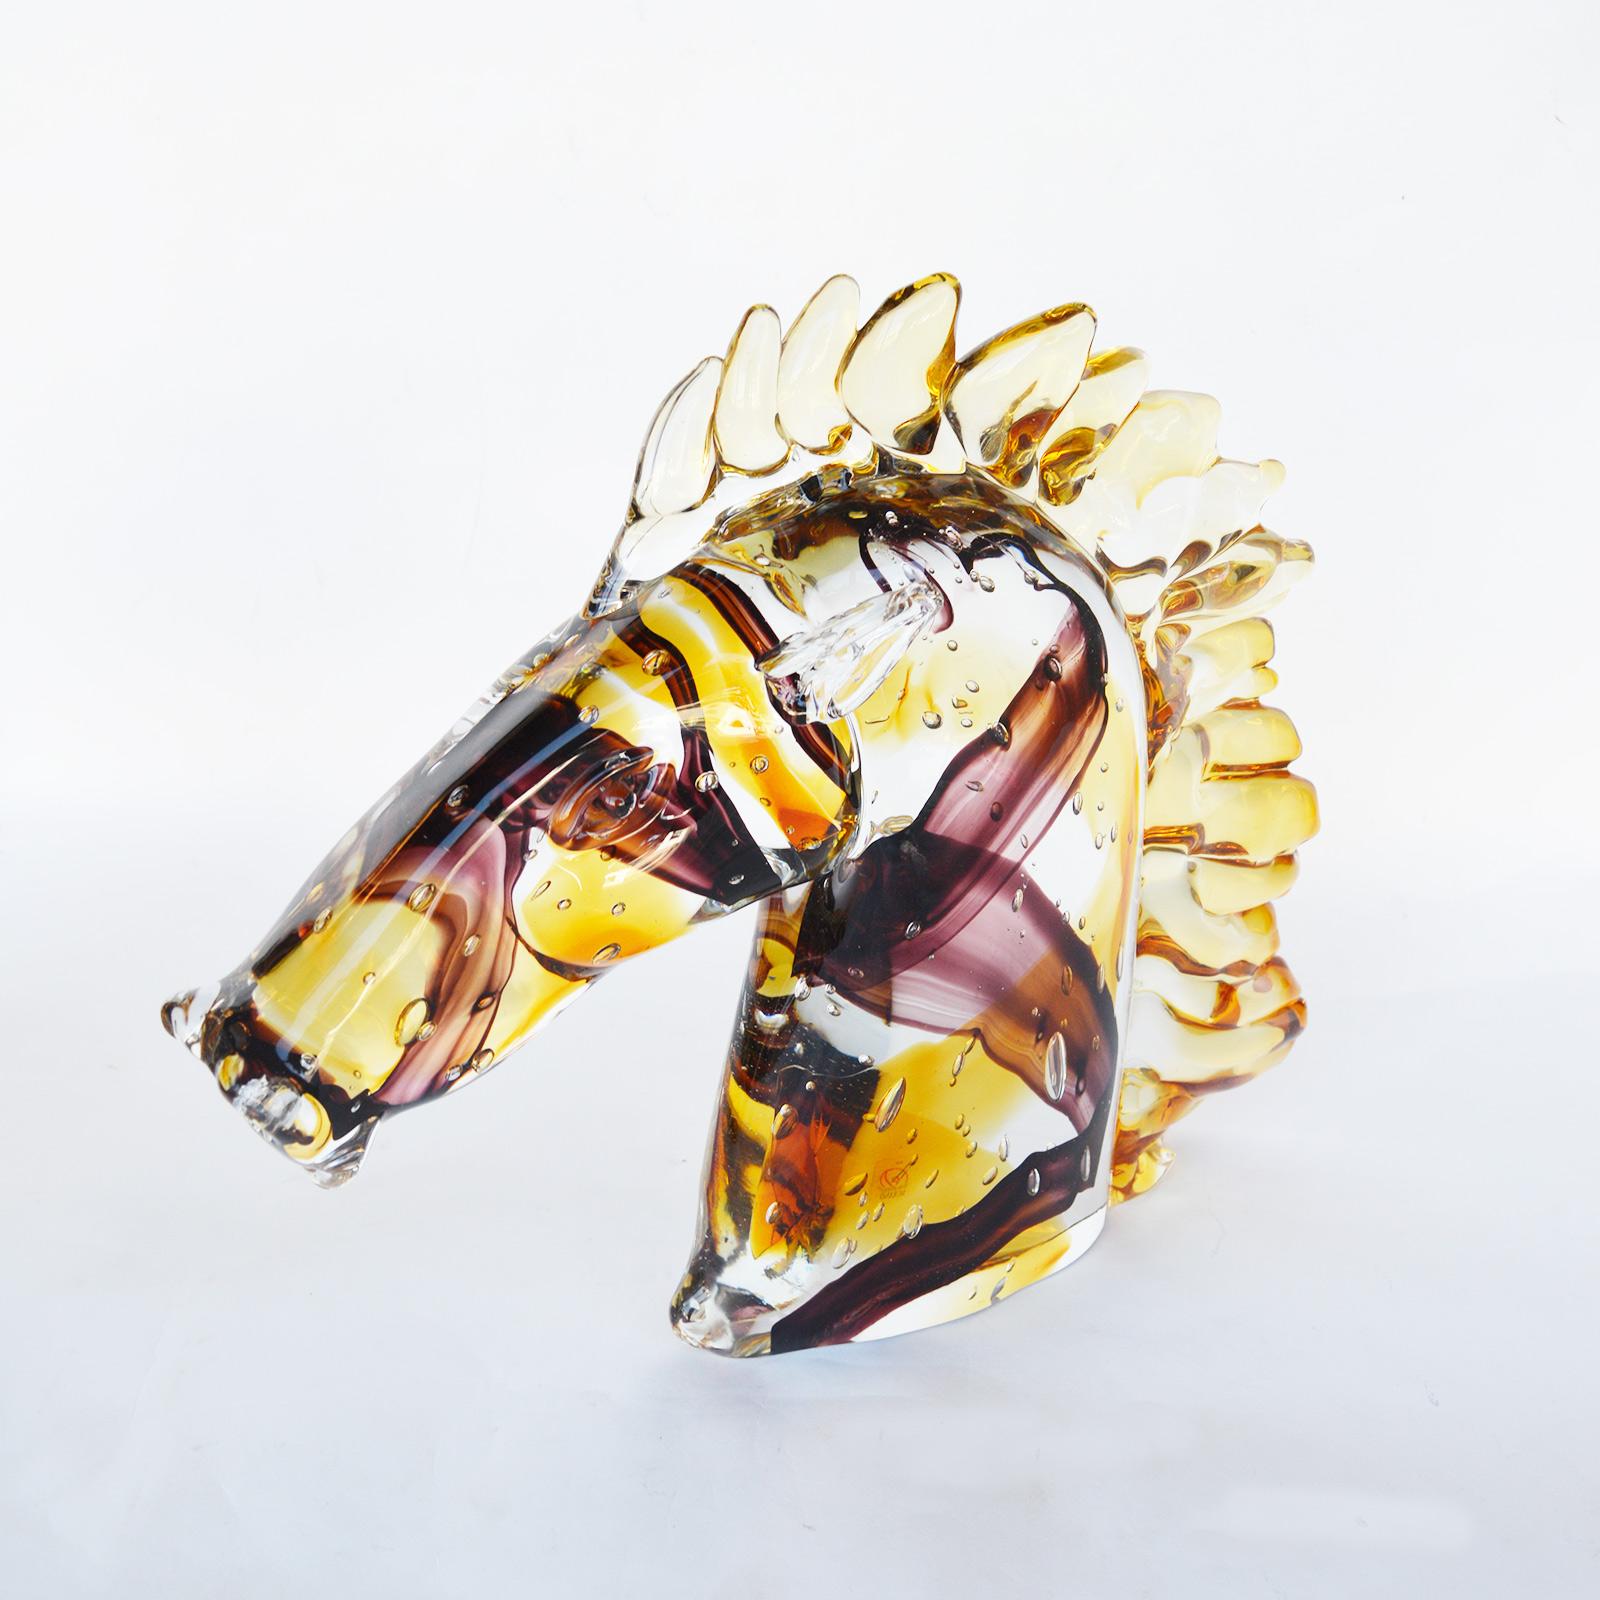 Murano Glass Set of Three Murano Horses Head Sculptures by Sergio Costantini, 1980s For Sale